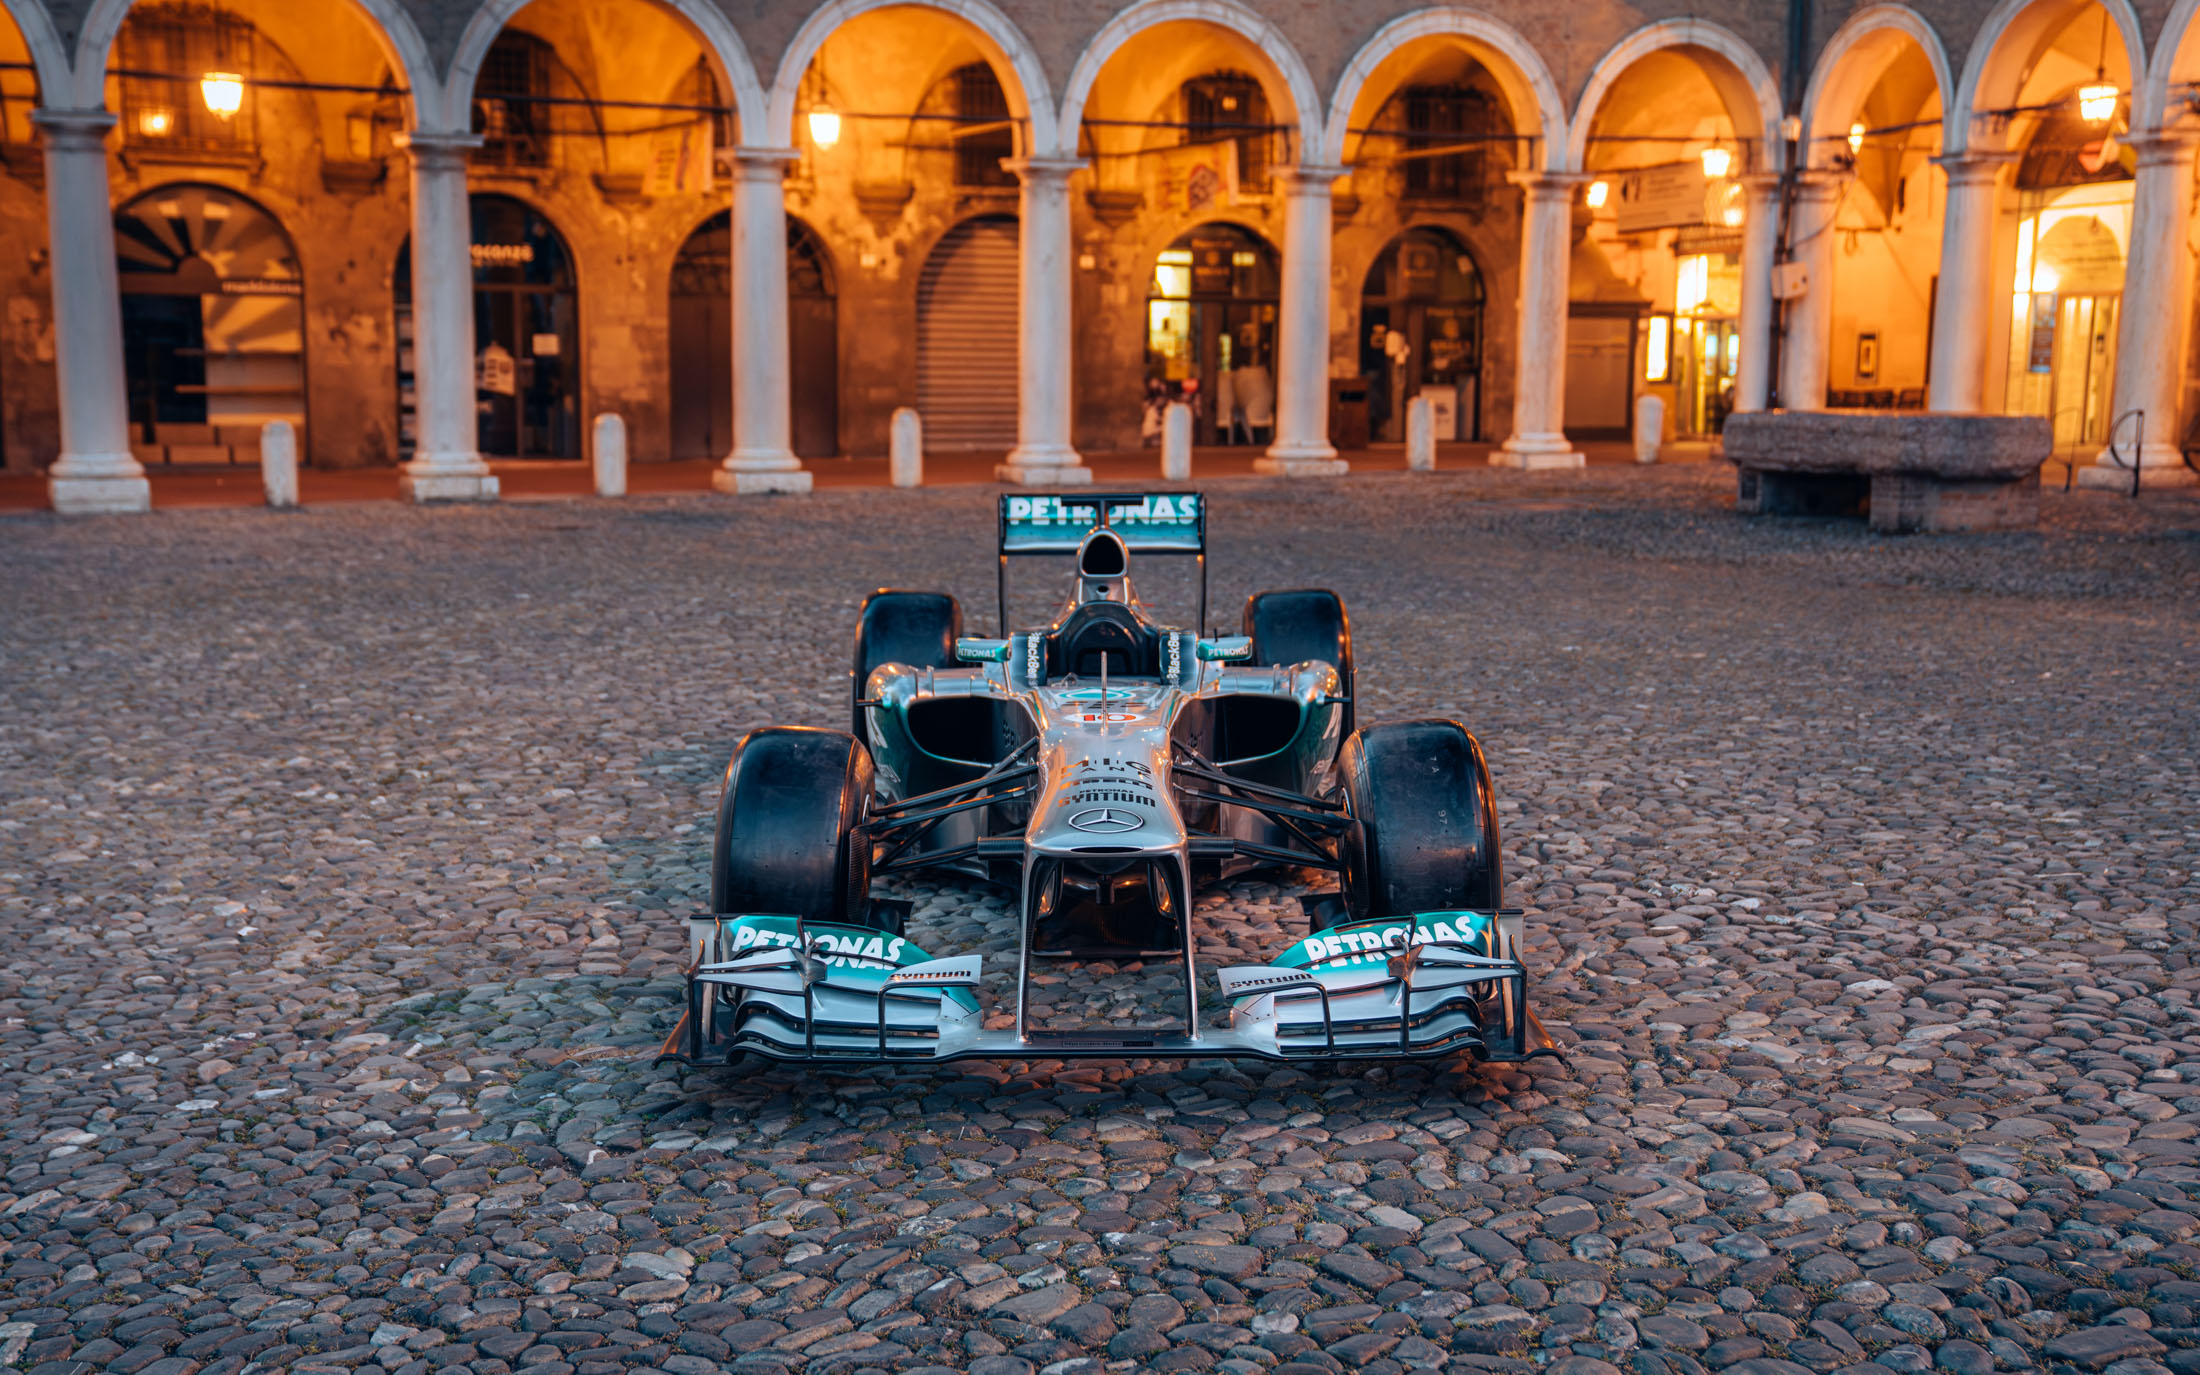 Lewis Hamilton's first race-winning Mercedes F1 car is going up for auction